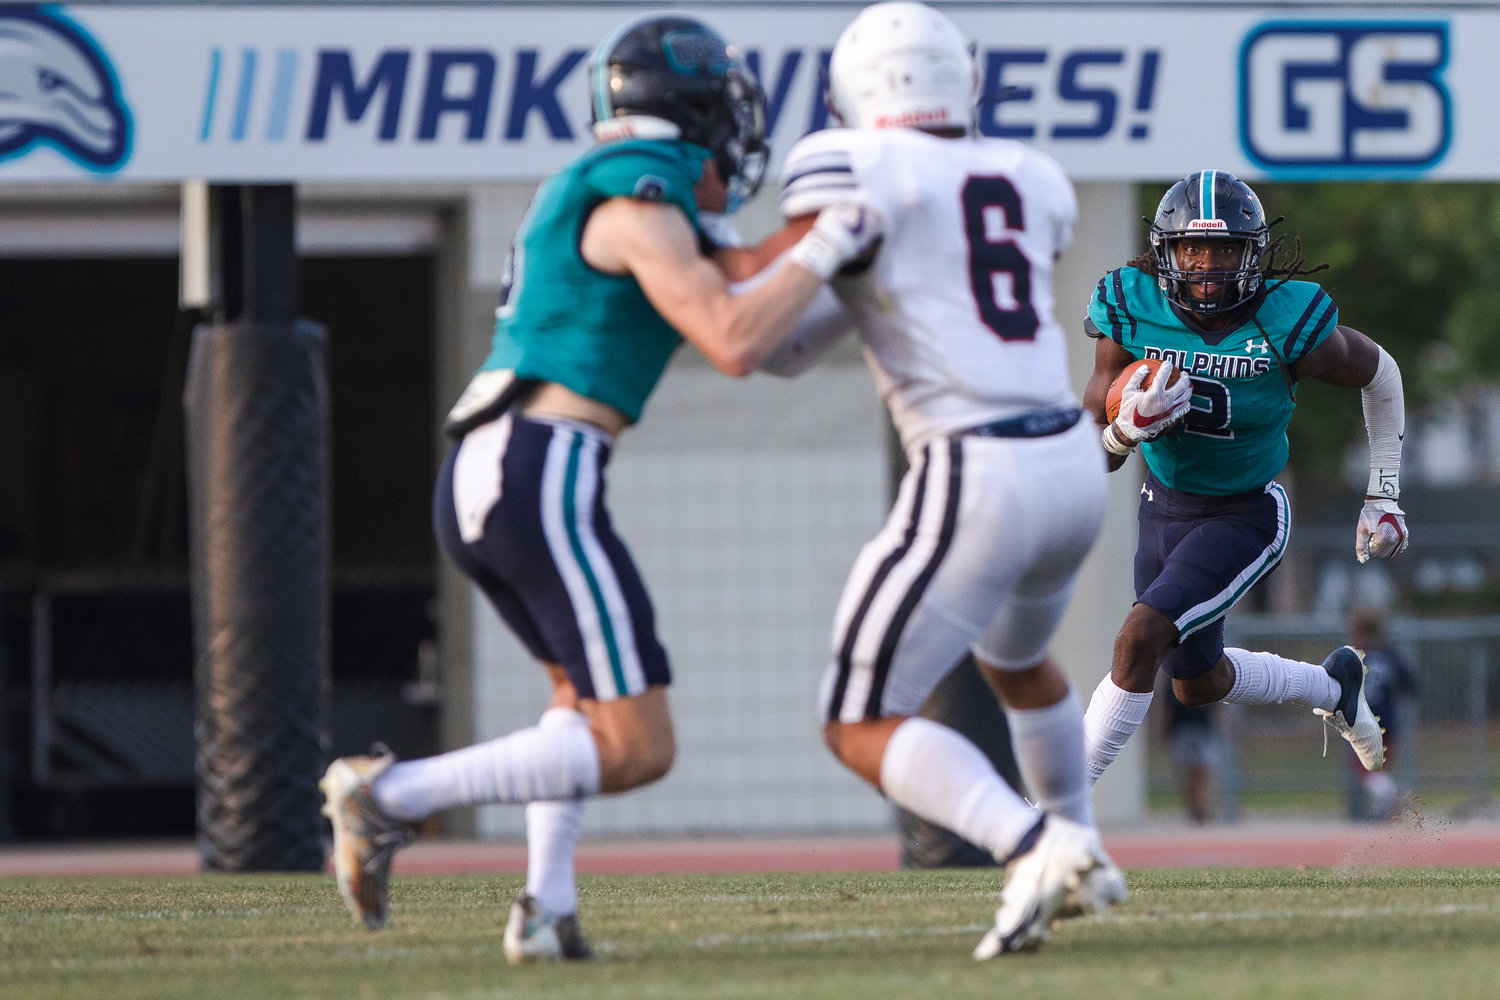 Gulf Shores running back Ronnie Royal looks for a block on the edge during the Dolphins’ Spring Game against Haralson County at the Sportsplex May 13. Royal was recently ranked the 27th athlete prospect in the country for the Class of 2024 on ESPN junior 300’s list.